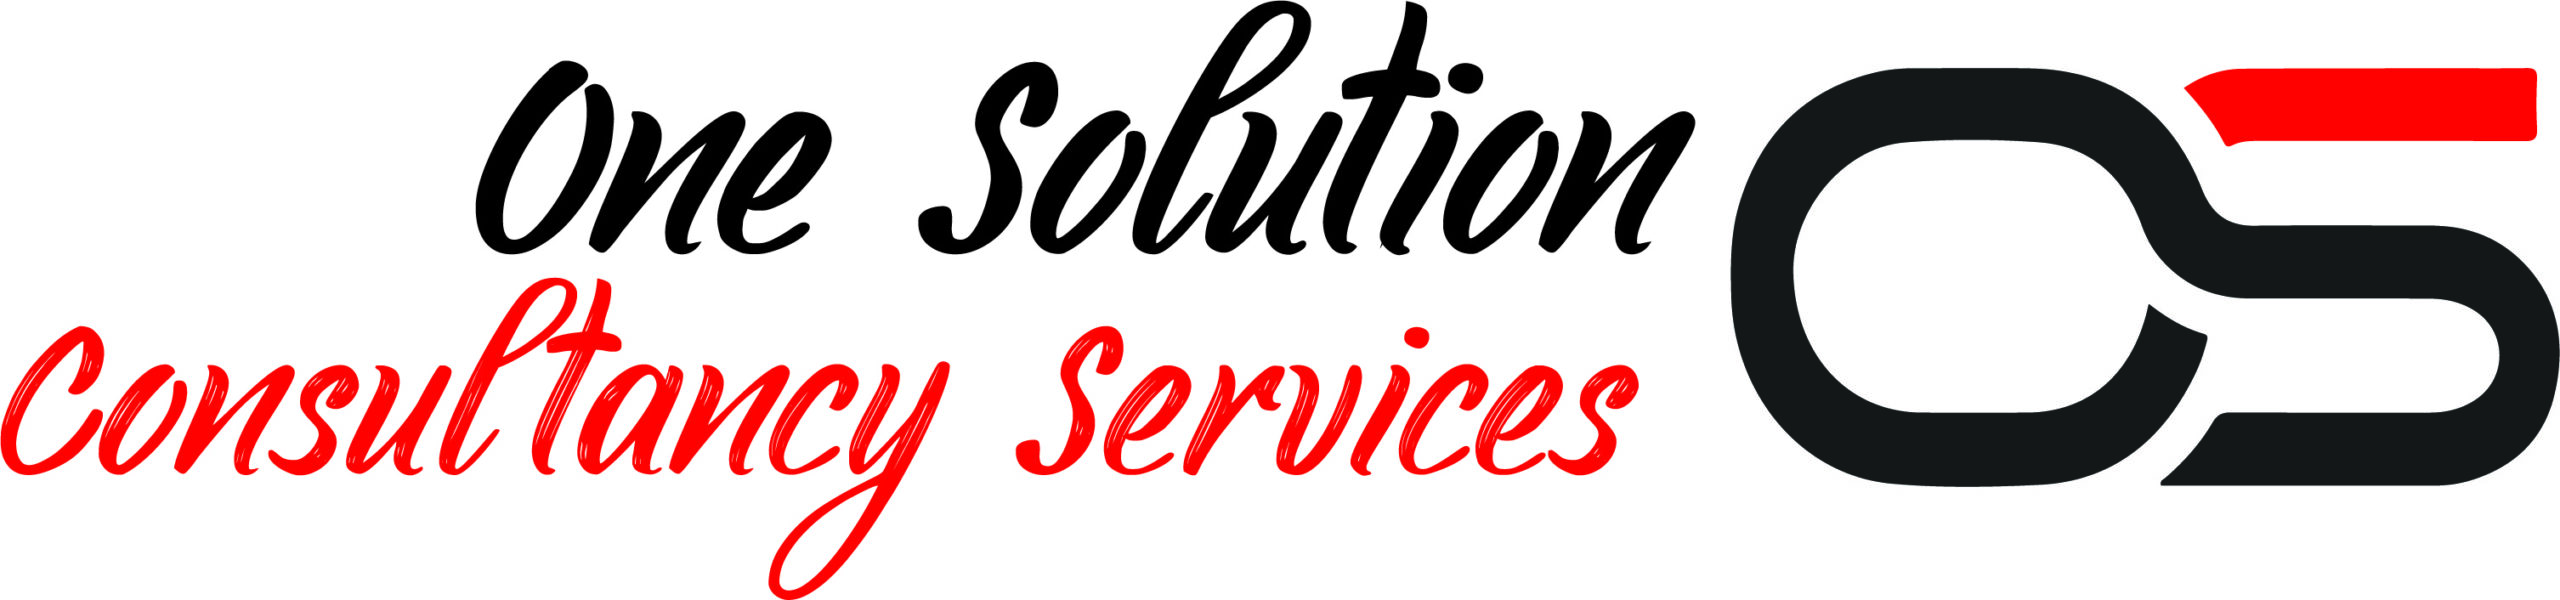 One Solution Consultancy – #1 IT Consultants!